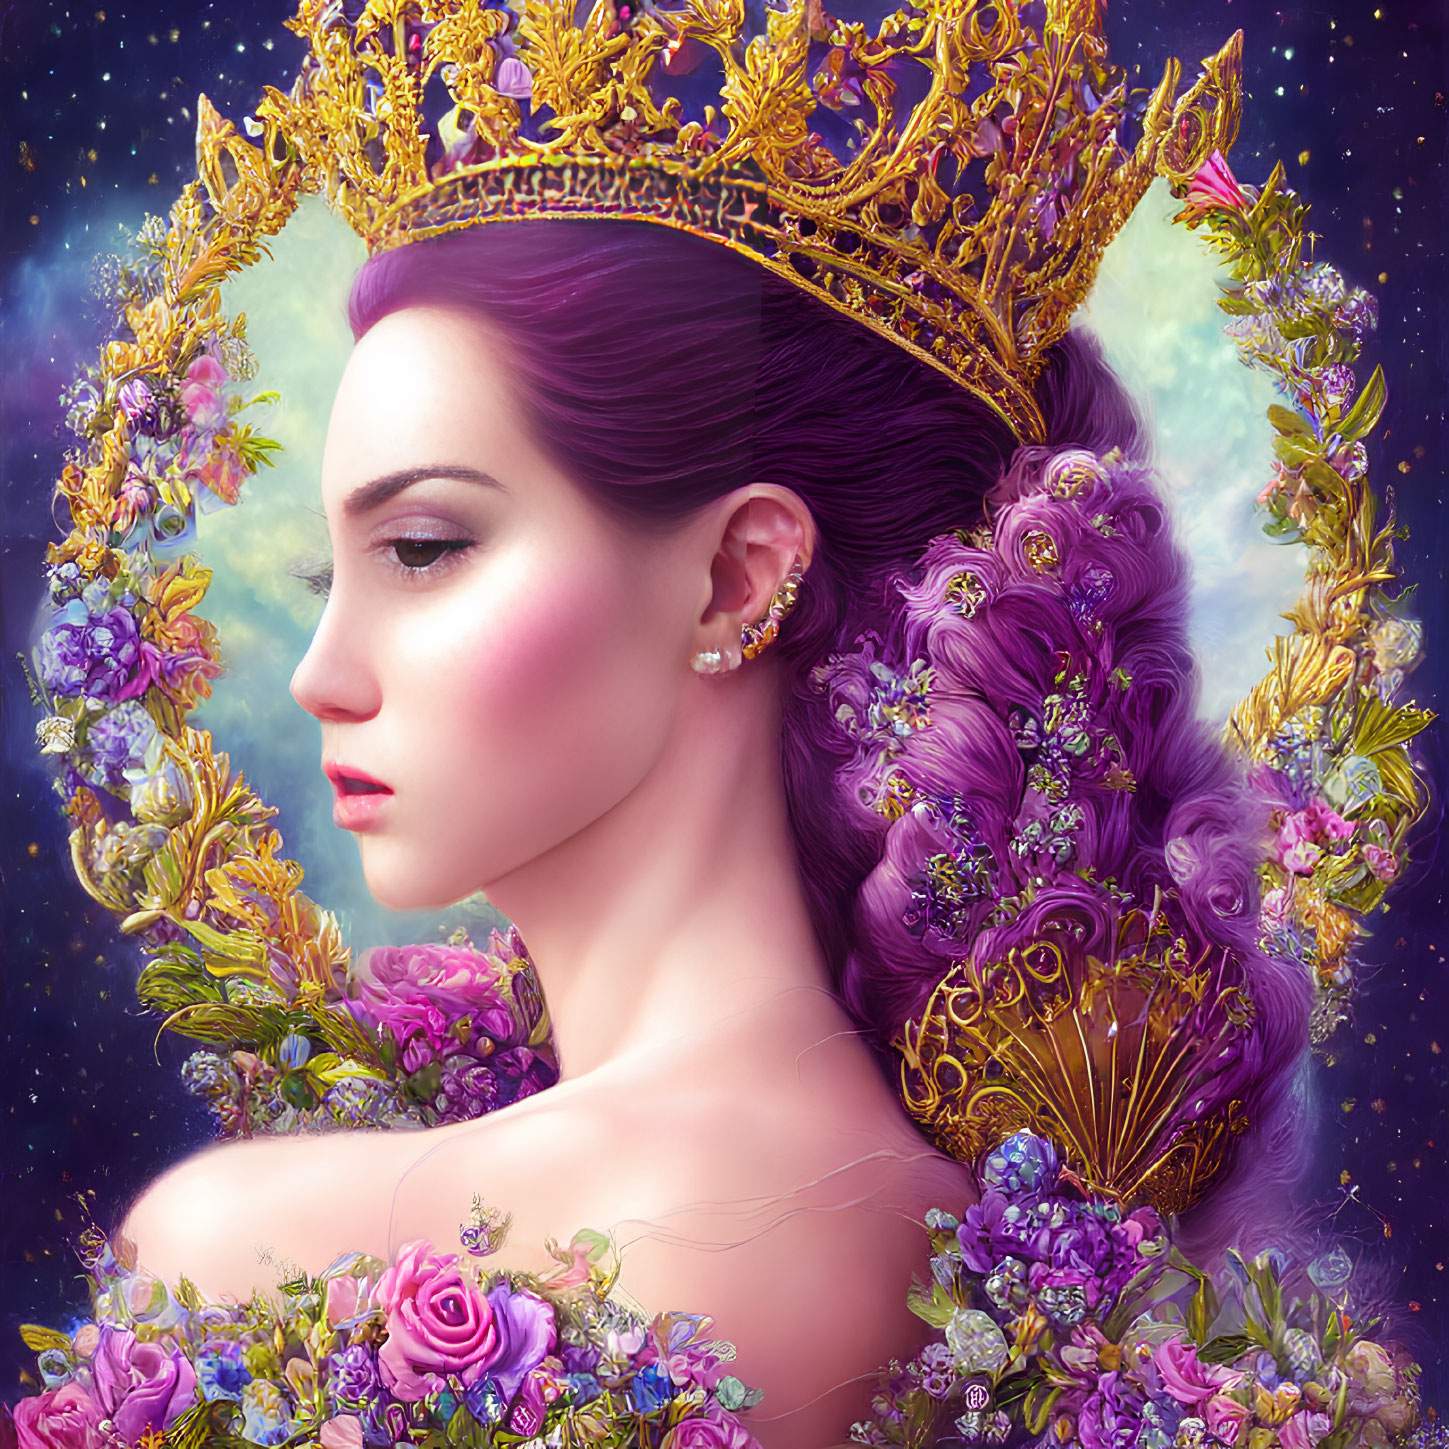 Purple-haired figure with golden crown and blooms on starry backdrop